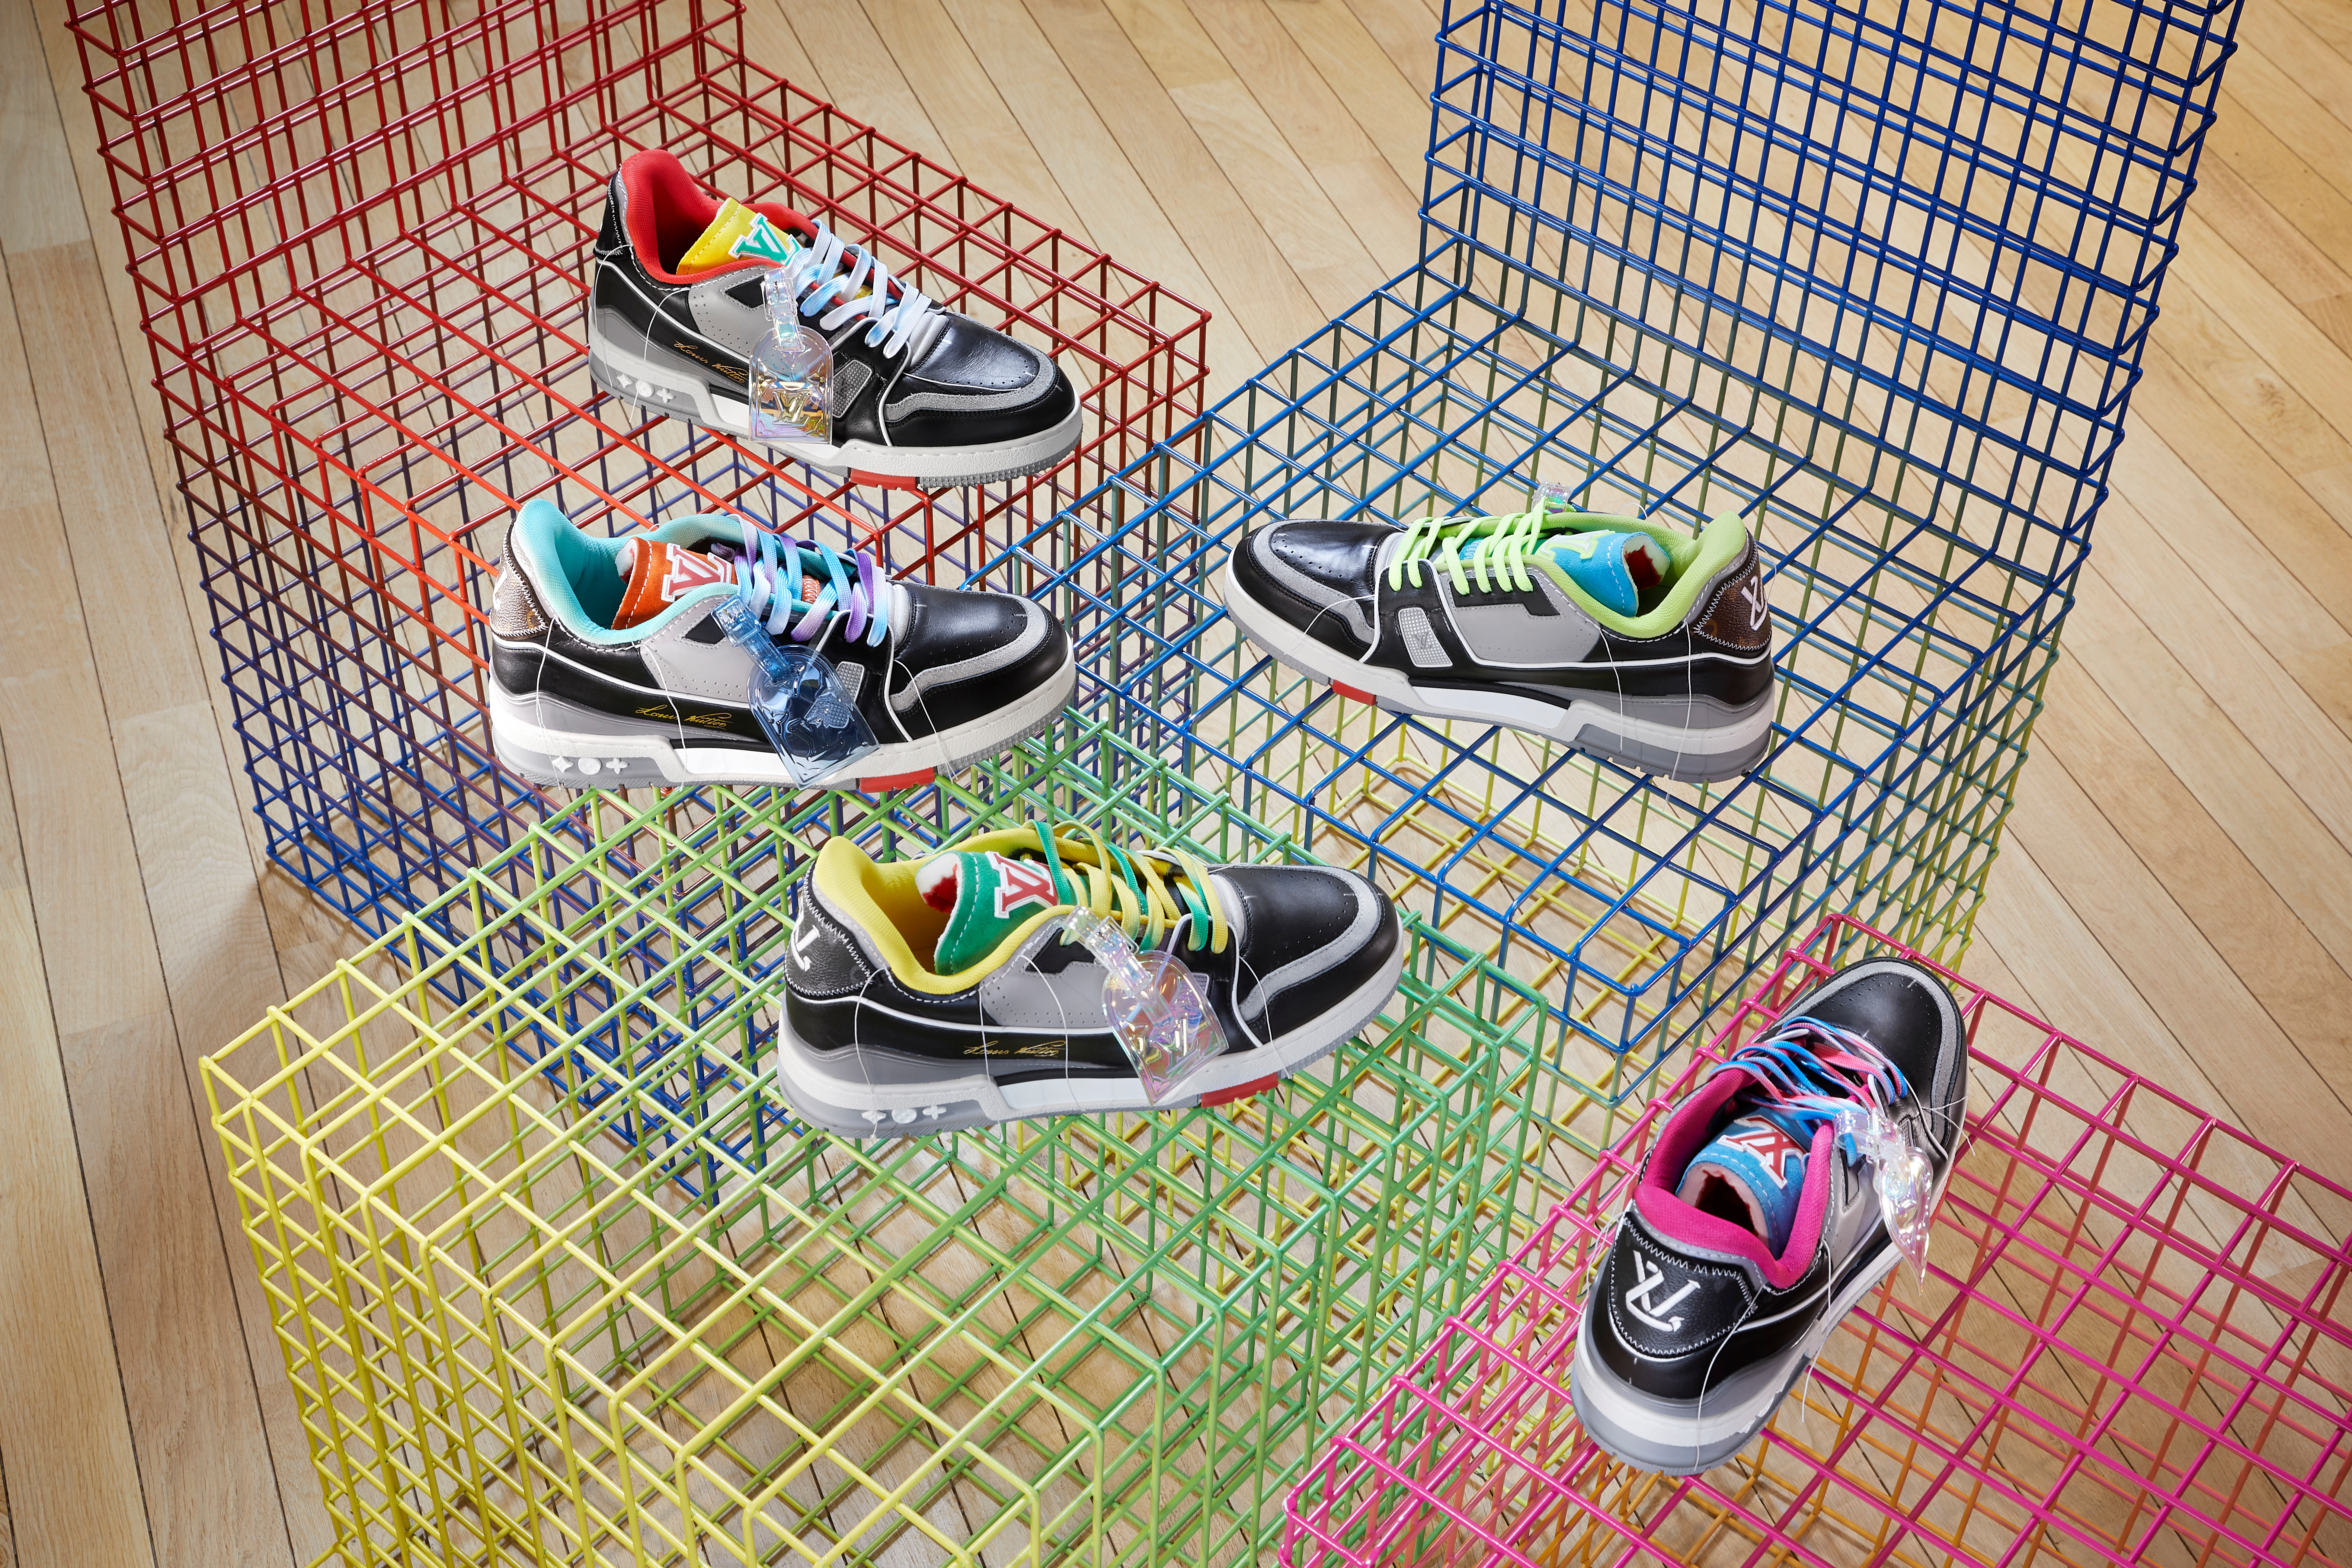 A selection of Louis Vuitton sneakers designed by Virgil Abloh.